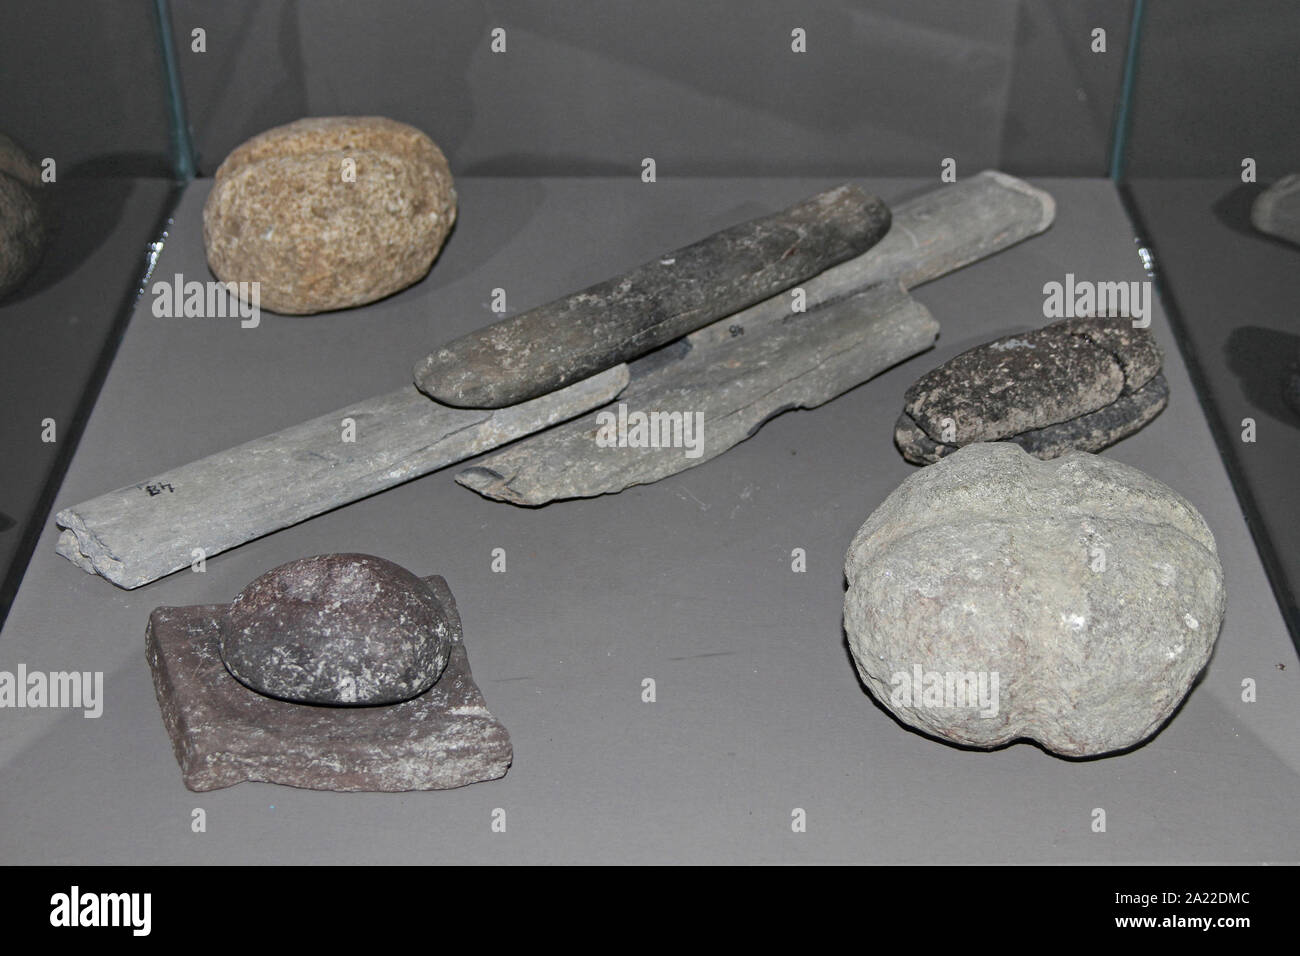 Collection ancient prehistoric dug up fossil stone tools, knives, daggers, etc in enclosed glass display at National Archaeological Museum Djerdap, Kladovo, Serbia. Stock Photo